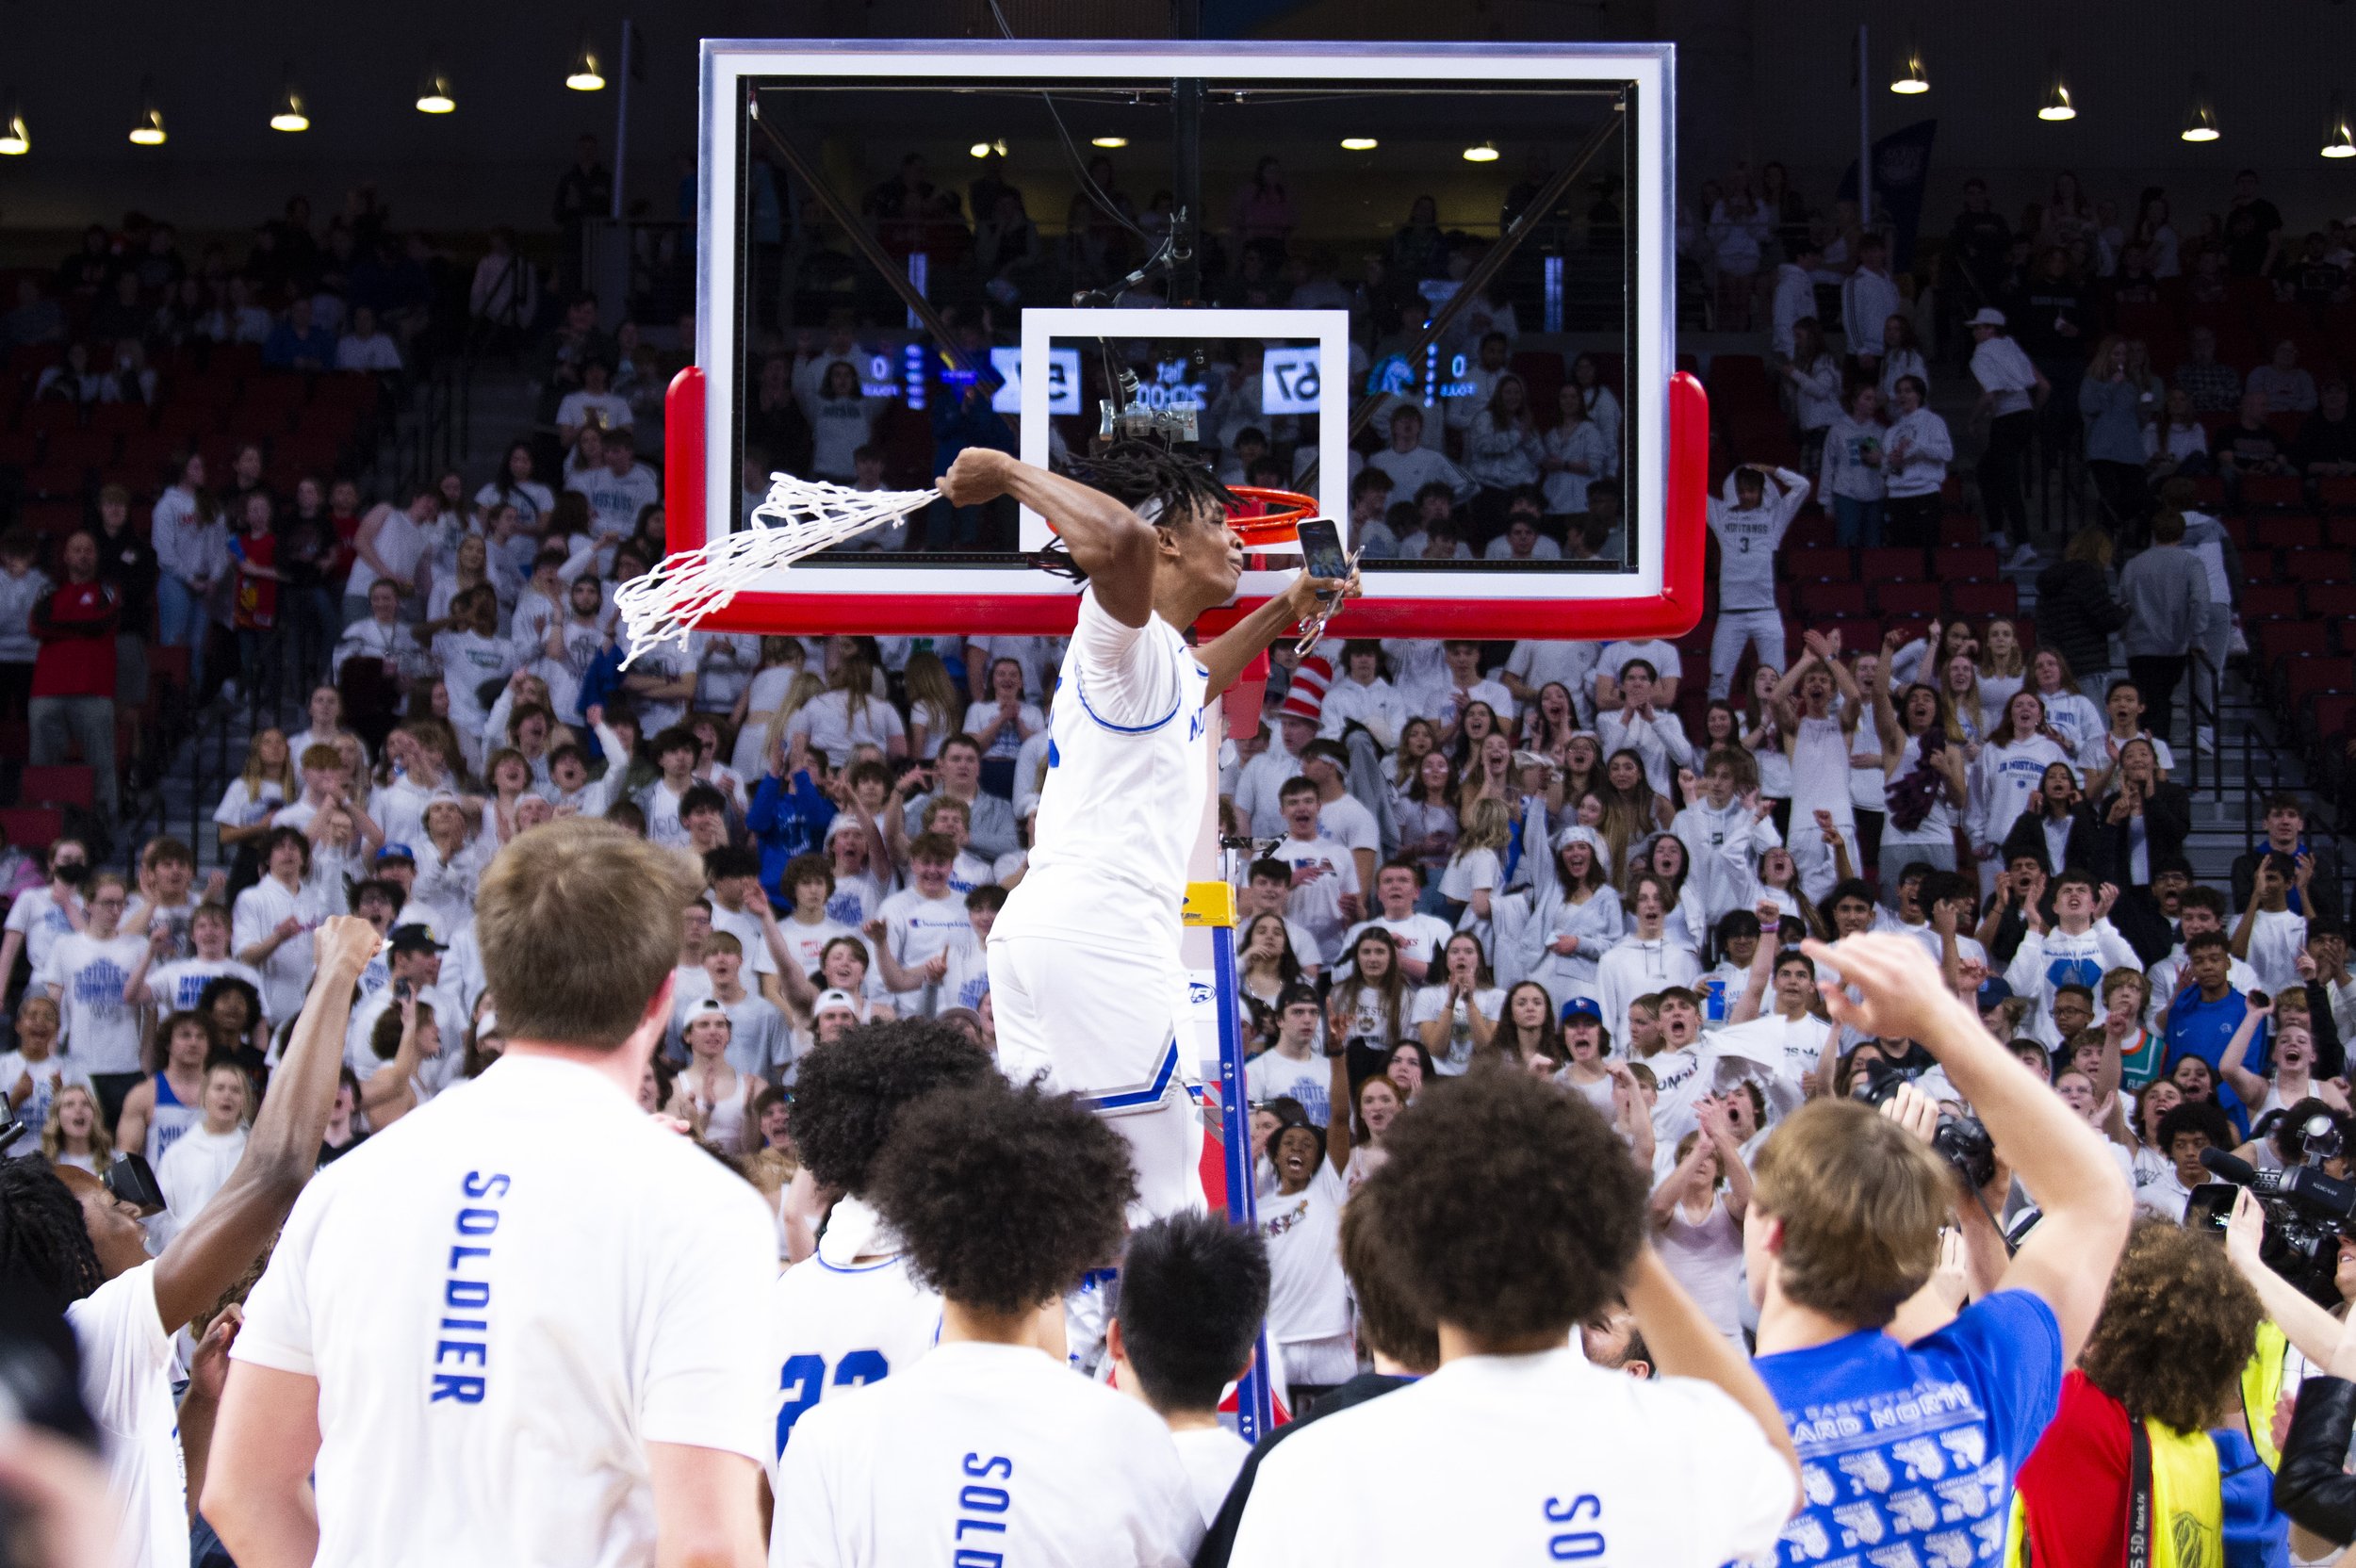  Millard North's David Harmon celebrates after cutting the net done, as his teammates and fans celebrate alongside him, during the Class CA boys championship at Pinnacle Bank Arena on March 12, 2022, in Lincoln, Nebraska.  